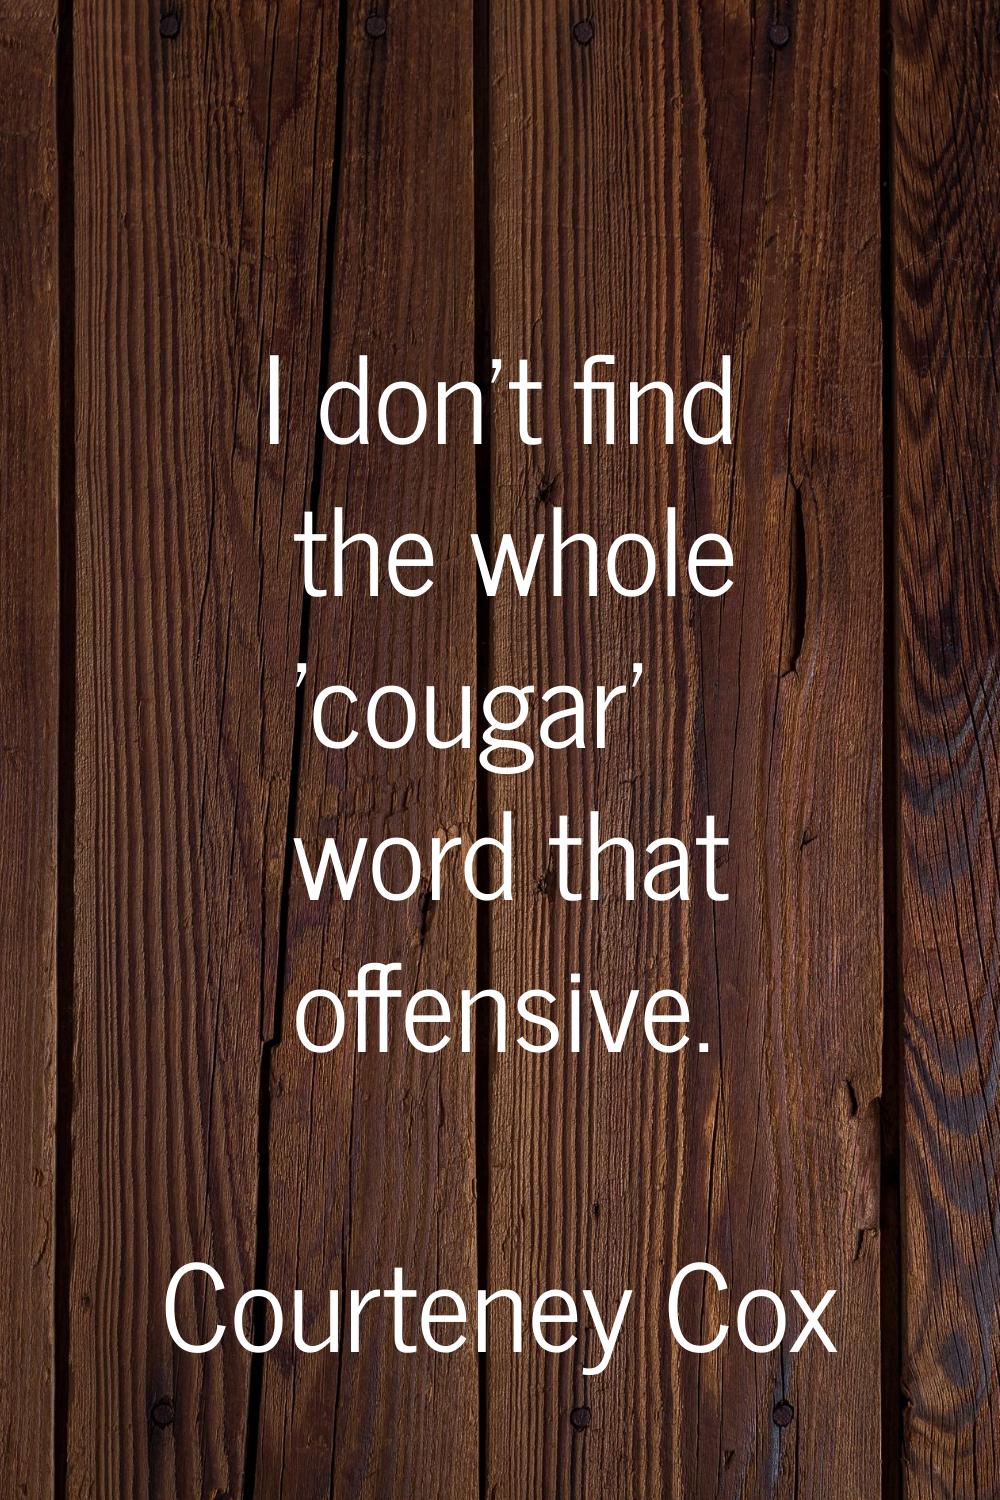 I don't find the whole 'cougar' word that offensive.